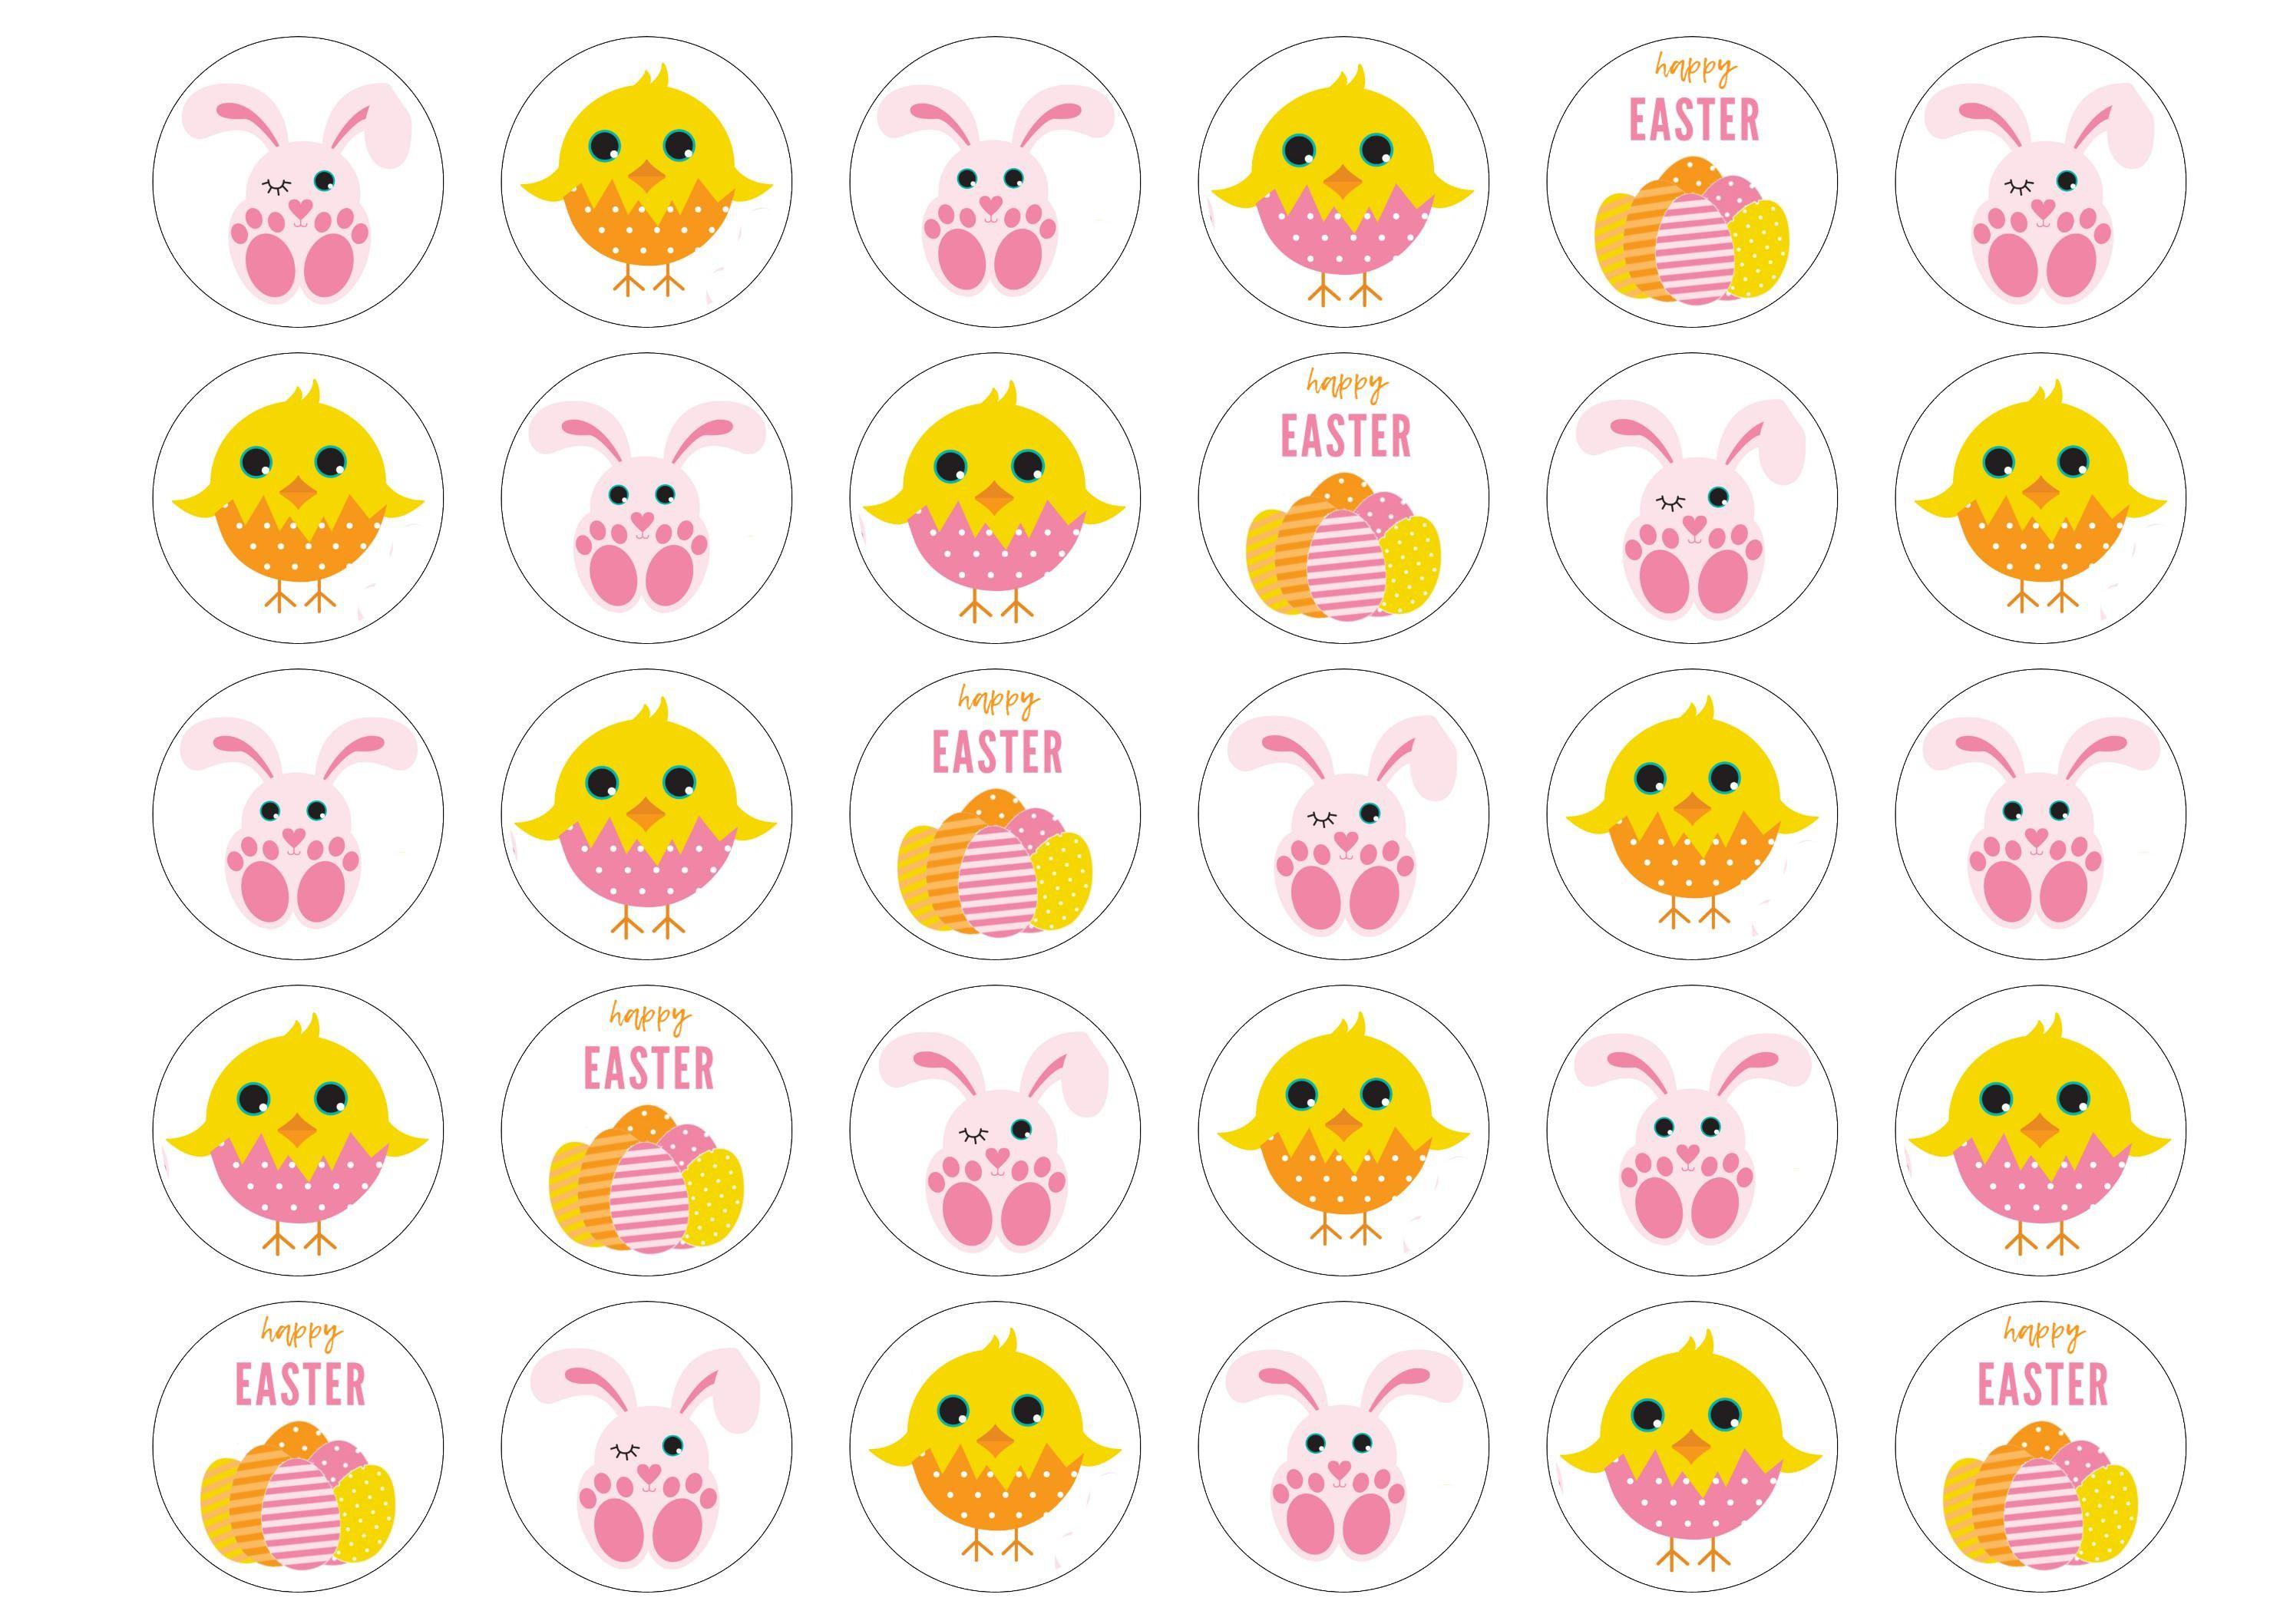 Edible Easter cupcake toppers with cute chicks and bunnies